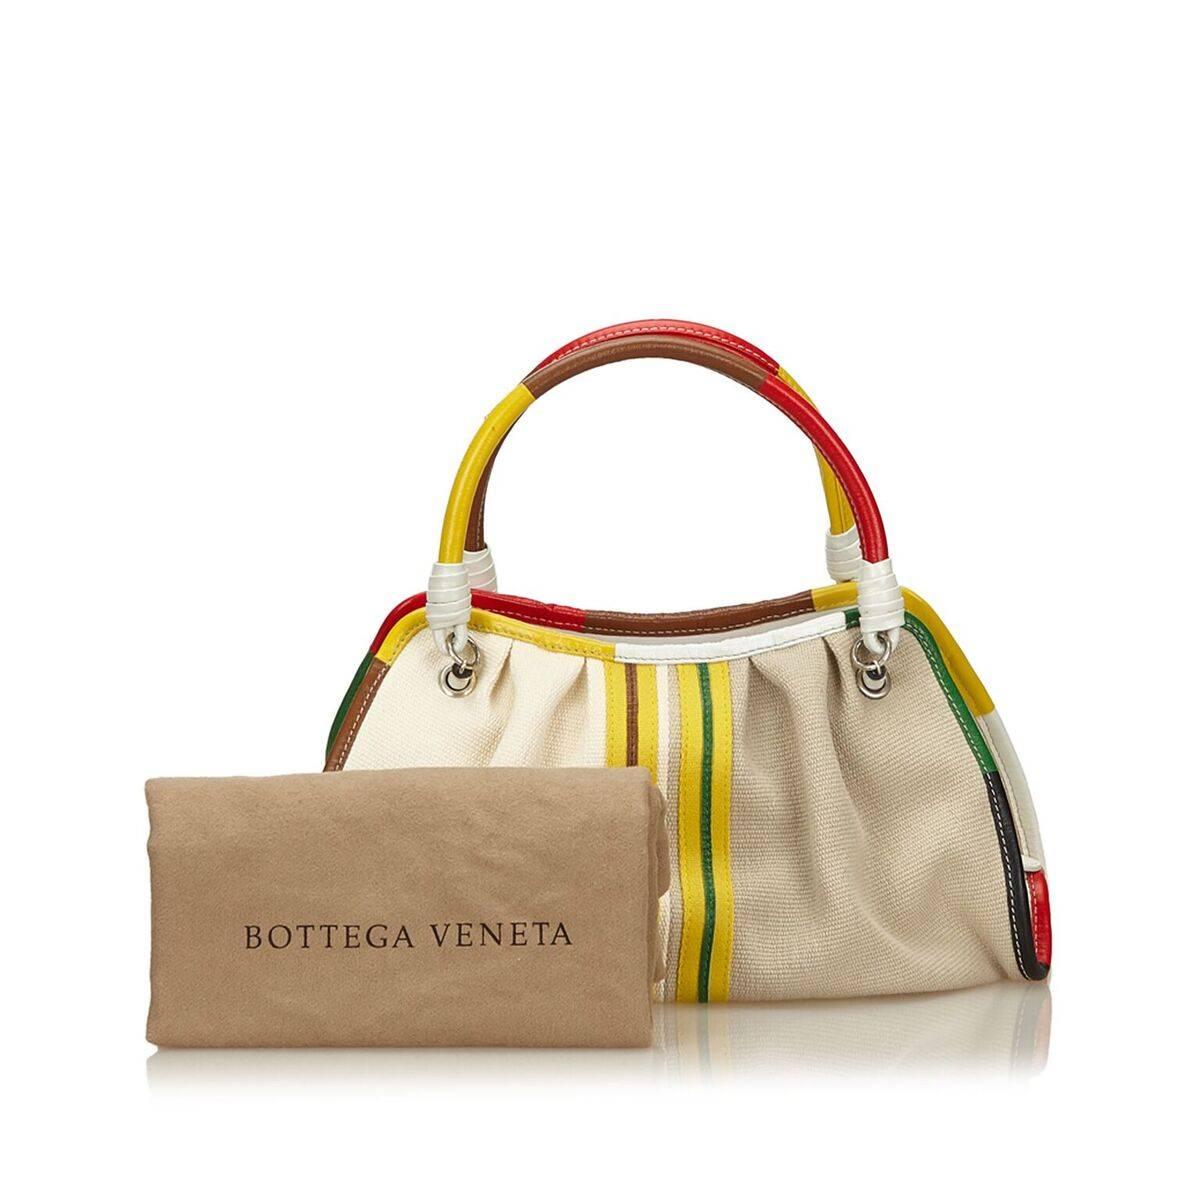 Product details:  Tan canvas tote bag by Bottega Veneta.  Trimmed with multicolor leather.  Dual carry handles.  Open top.  Lined interior with inner zip and open pockets.  Silvertone hardware.  Dust bag included.  13